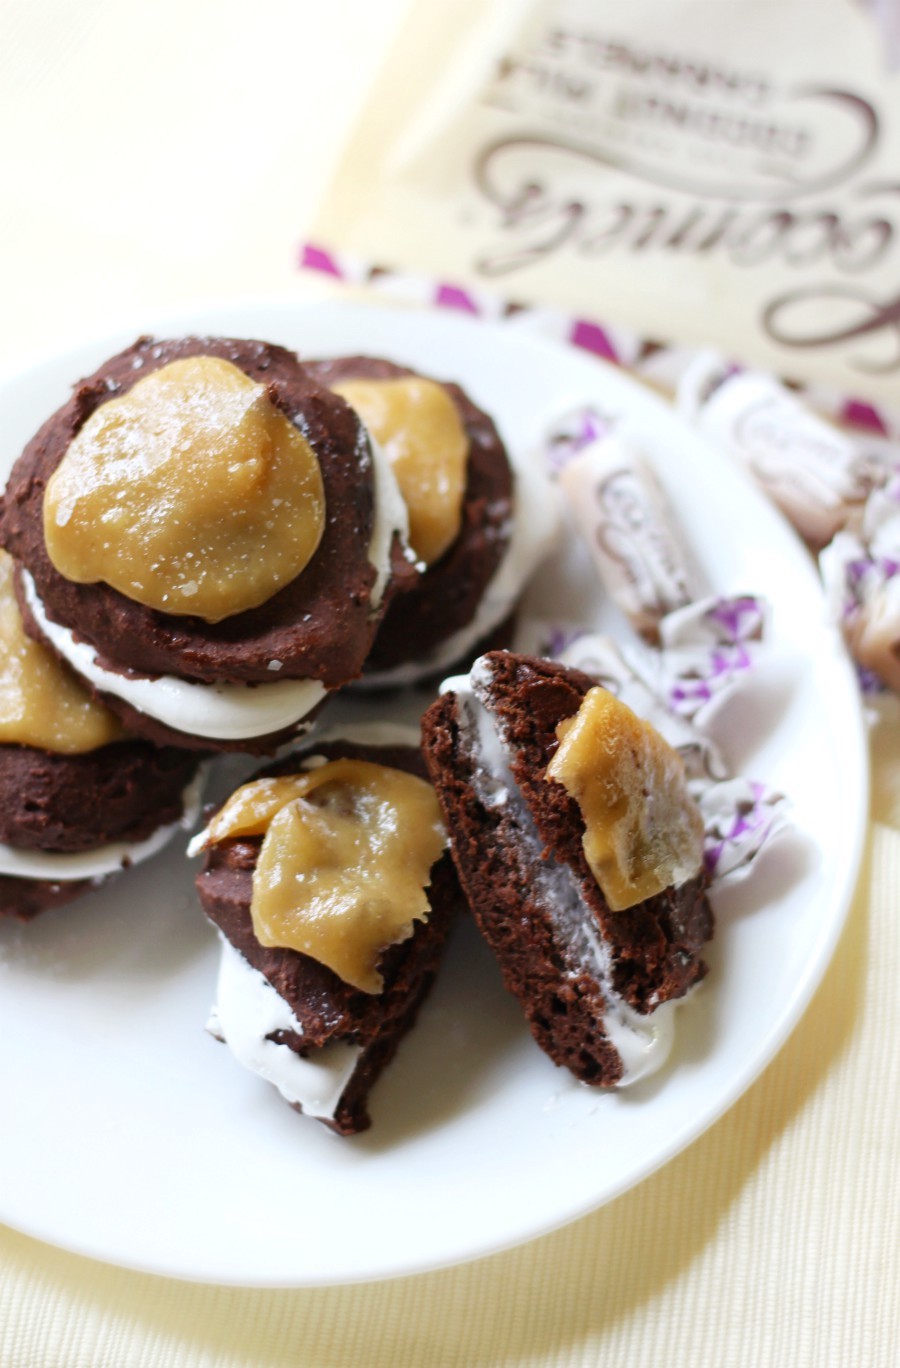 Mini Gluten-Free Salted Caramel Chocolate Whoopie Pies (Vegan, Allergy-Free) | Strength and Sunshine @RebeccaGF666 A fun flavor combo for your favorite American cream-filled "cookie-pie-cake"! These Mini Gluten-Free Salted Caramel Chocolate Whoopie Pies are vegan, top-8 allergy-free, and a perfect adult & kid-friendly dessert recipe! #whoopiepies #glutenfree #vegan #dessert #saltedcaramel